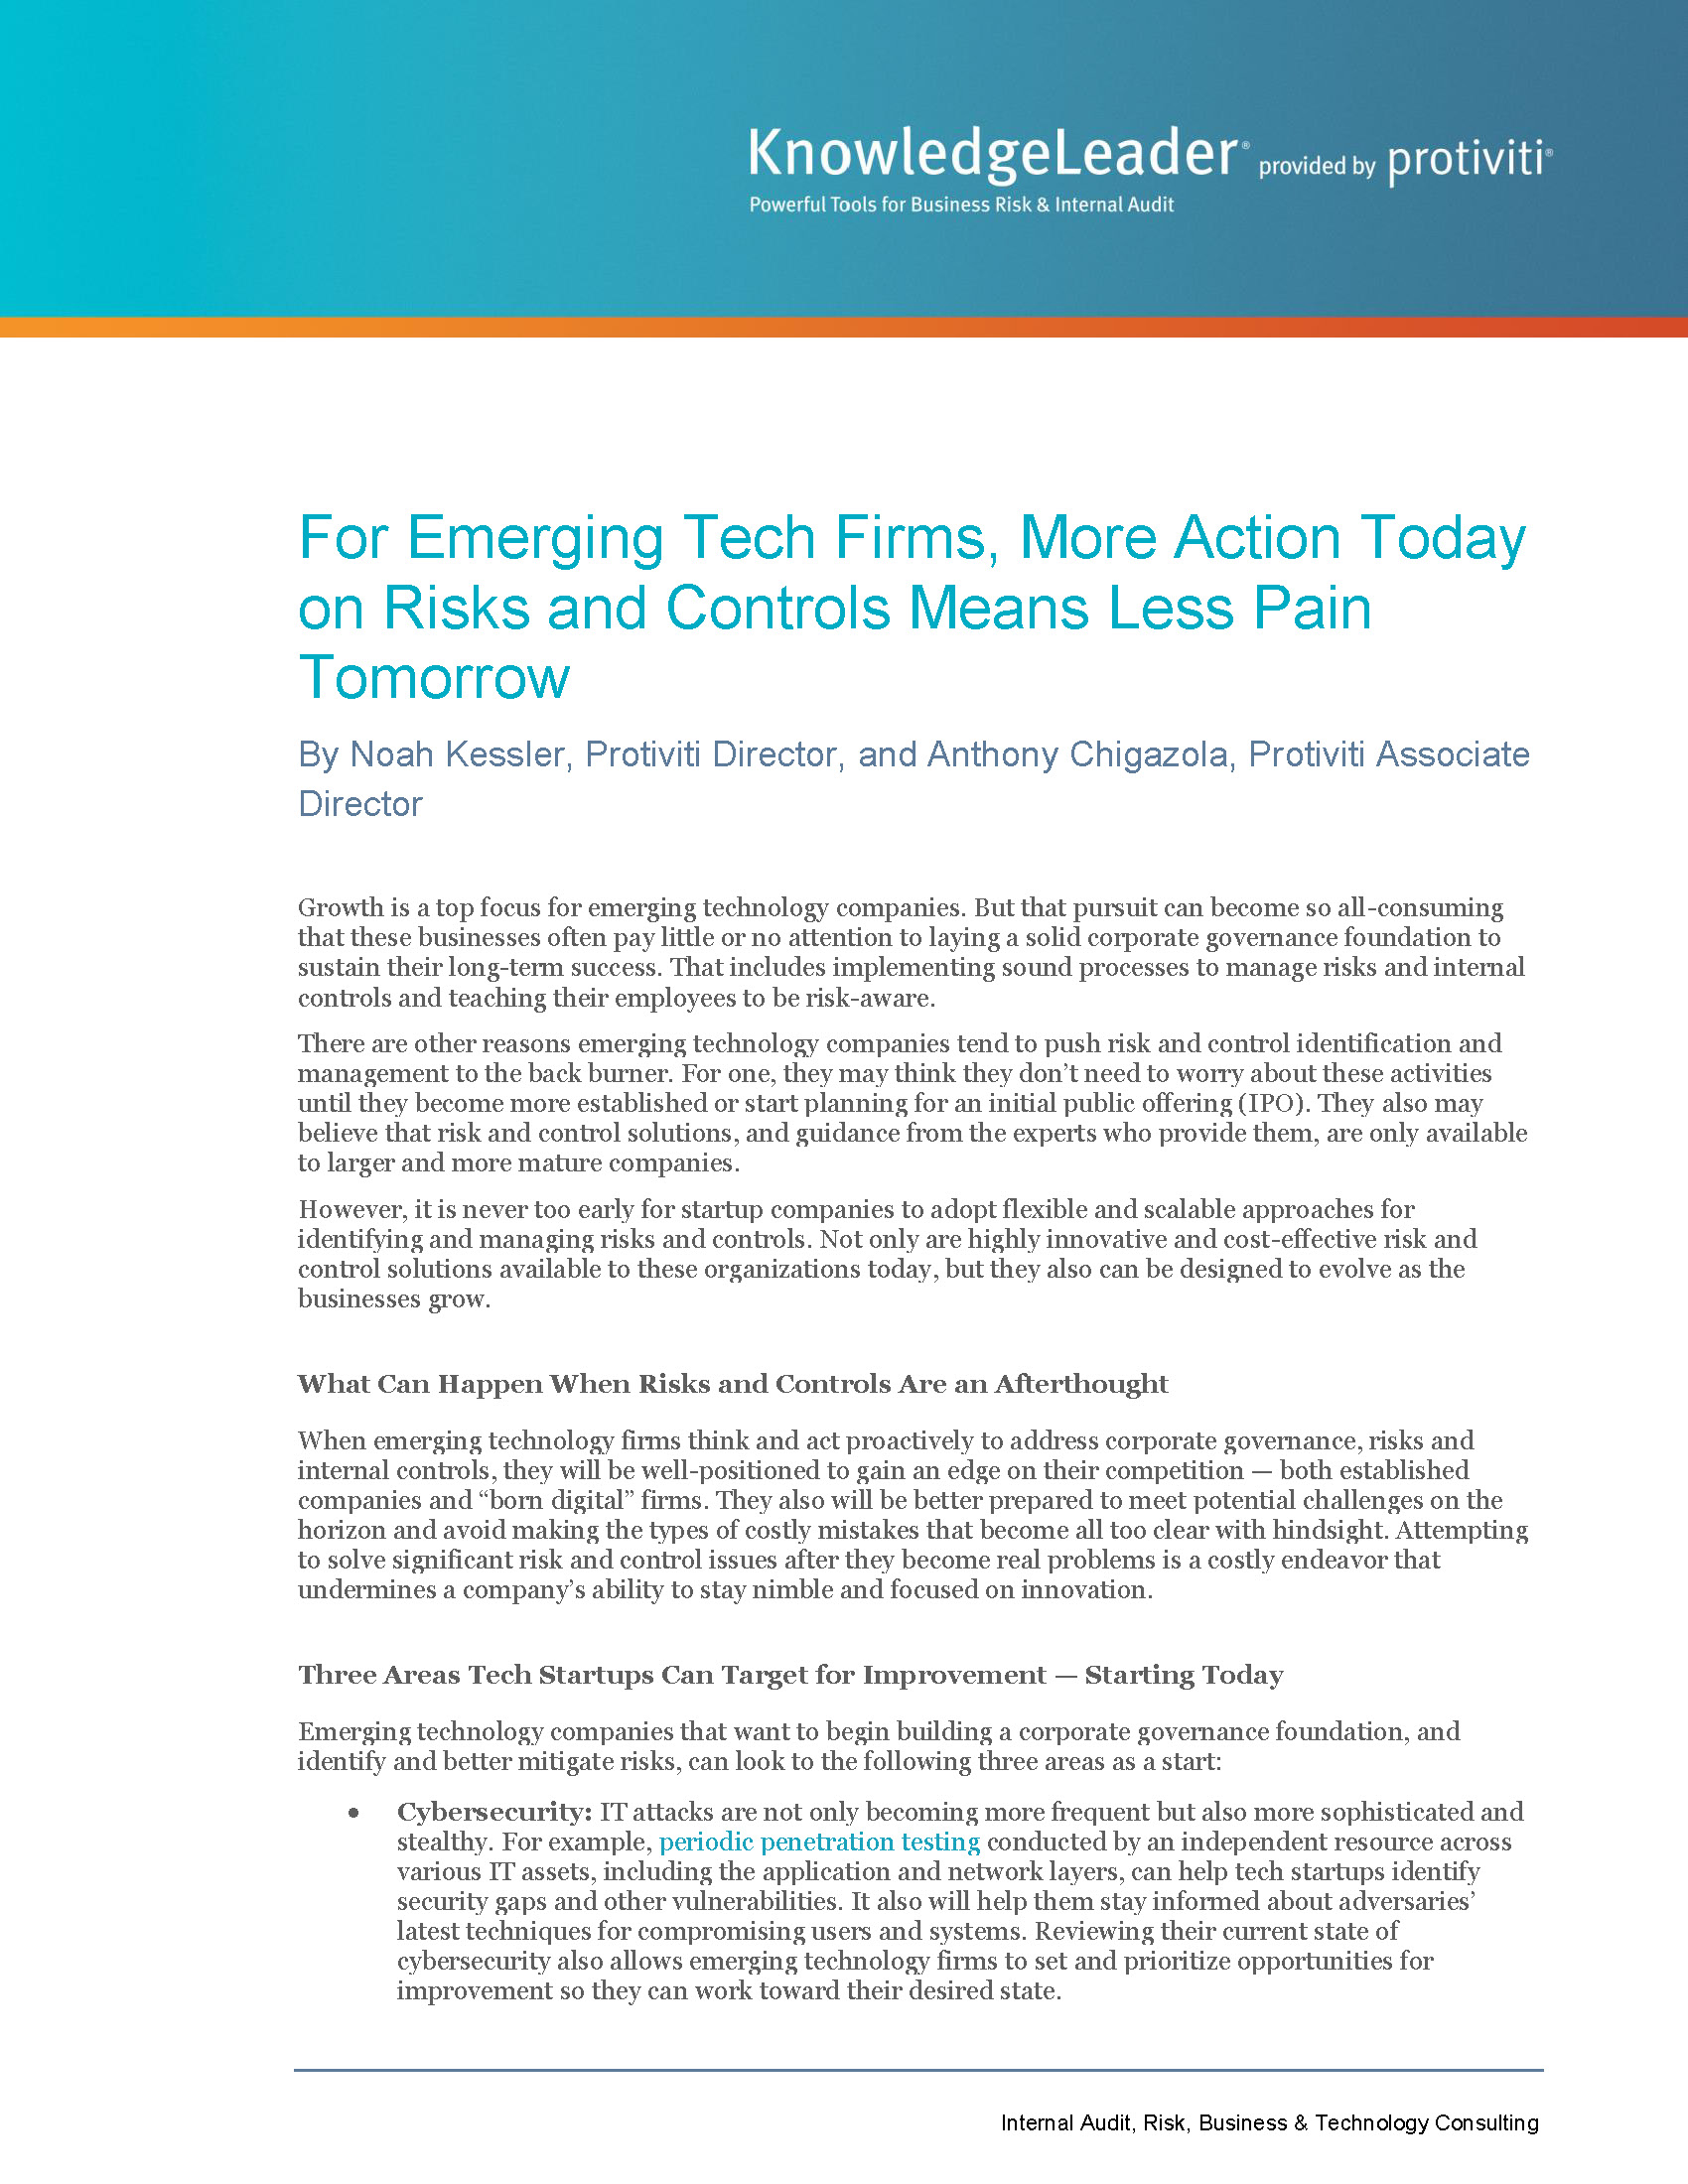 Screenshot of the first page of For Emerging Tech Firms, More Action Today on Risks and Controls Means Less Pain Tomorrow